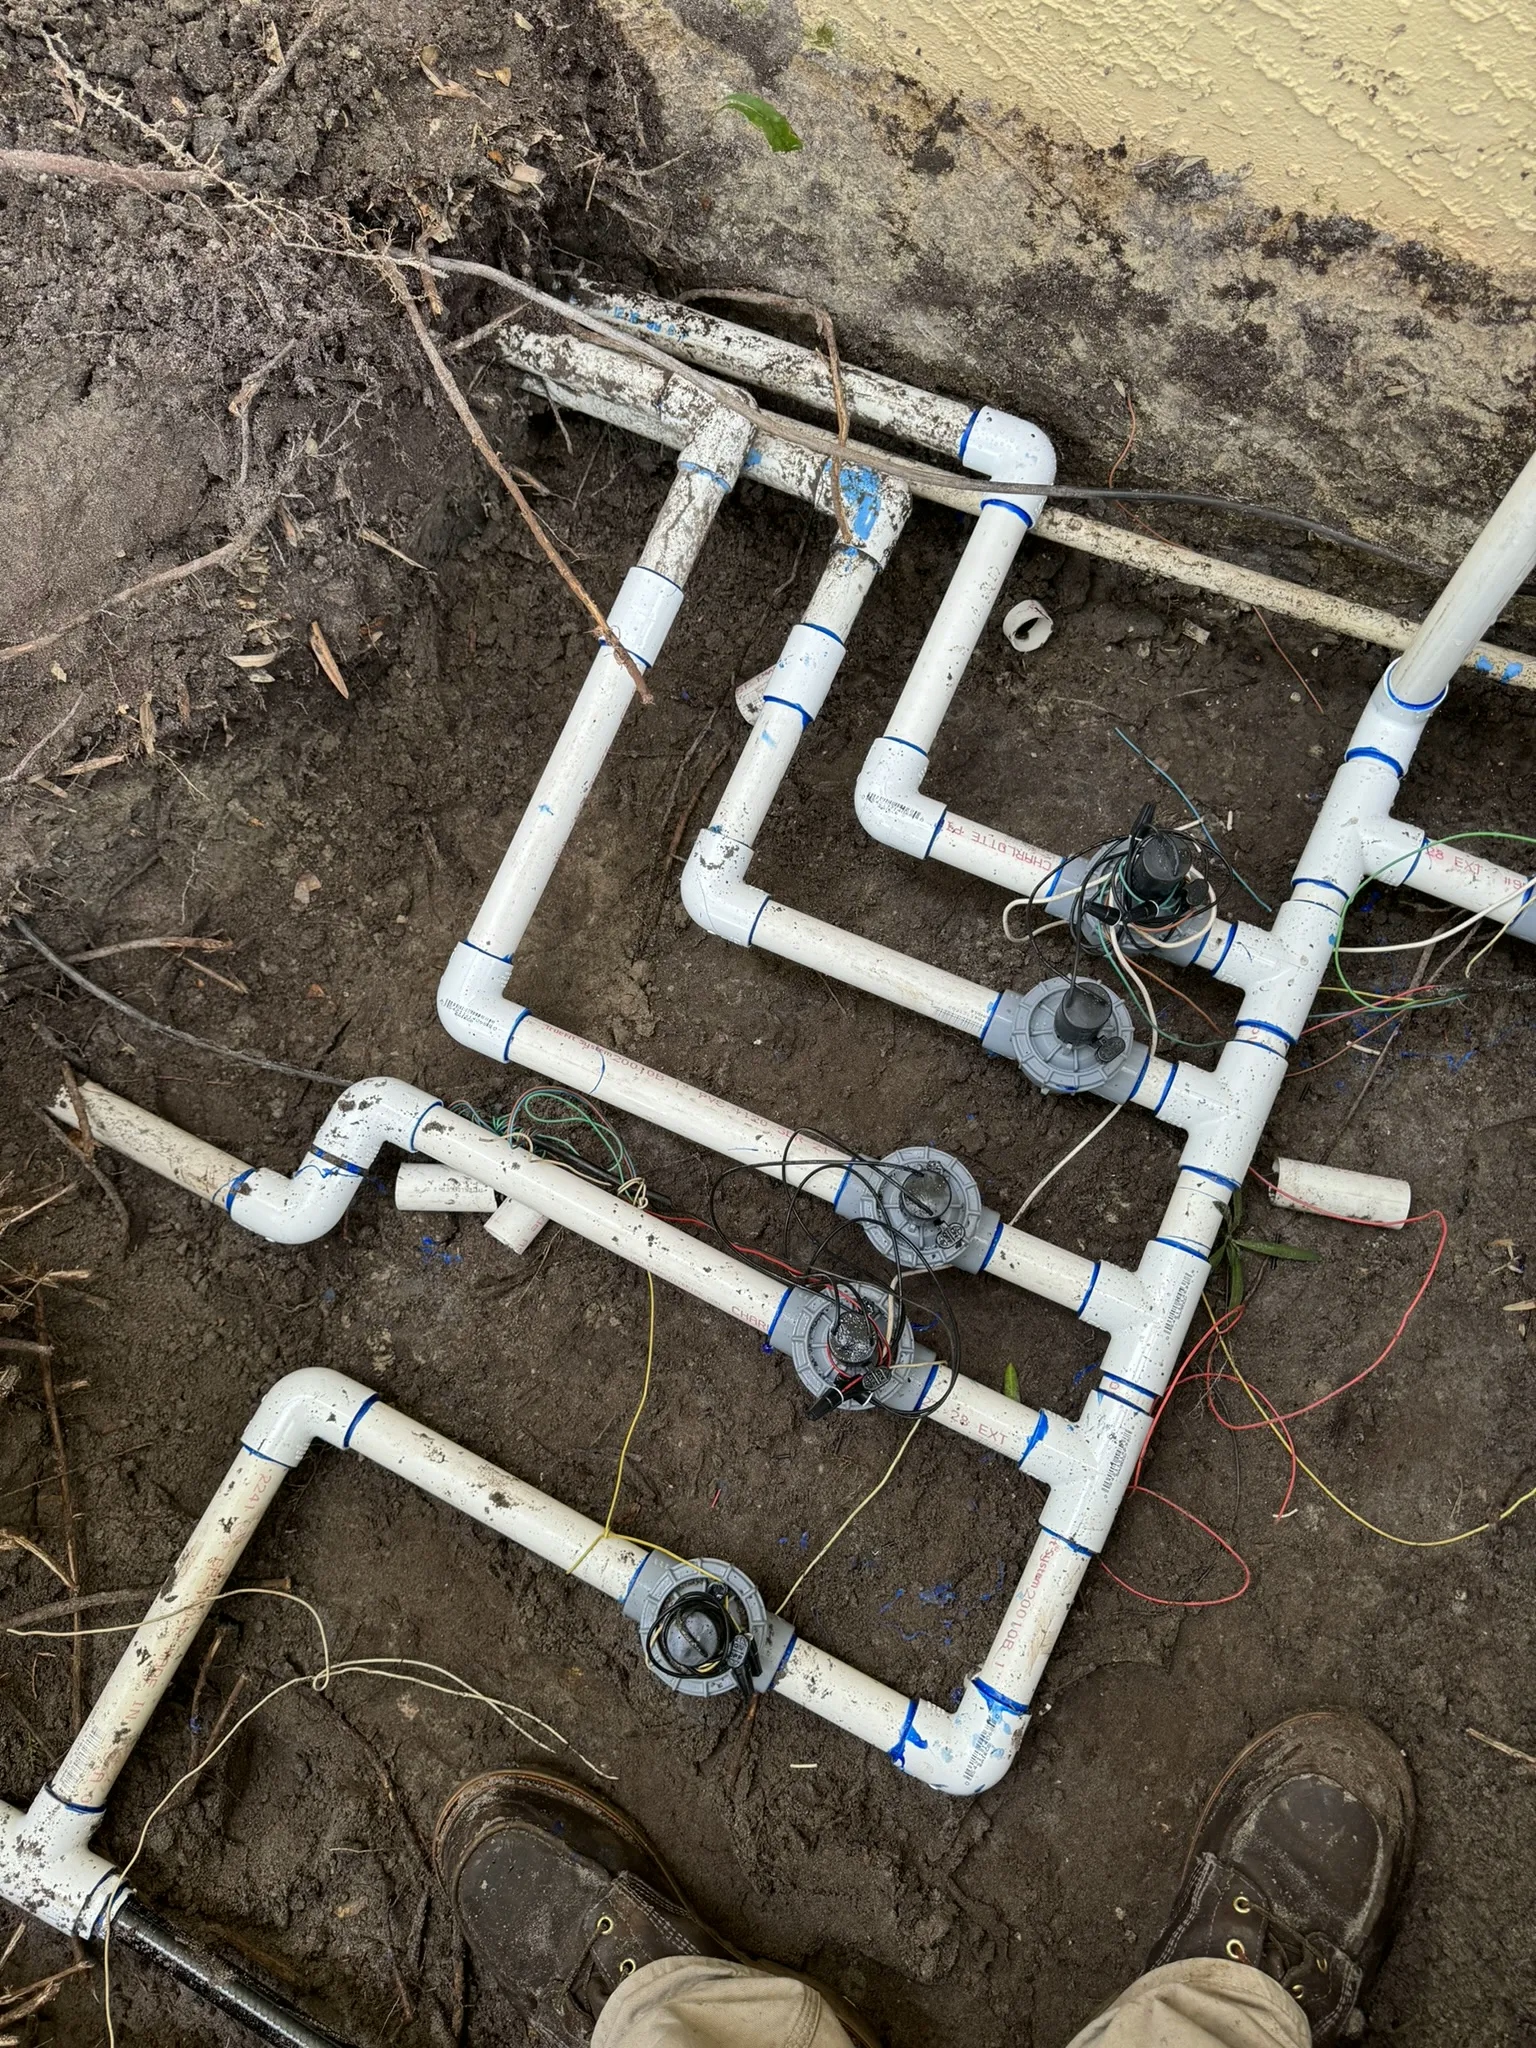 A complex system of underground pipes and electrical wires used to control the flow of water to different zones of a sprinkler system.